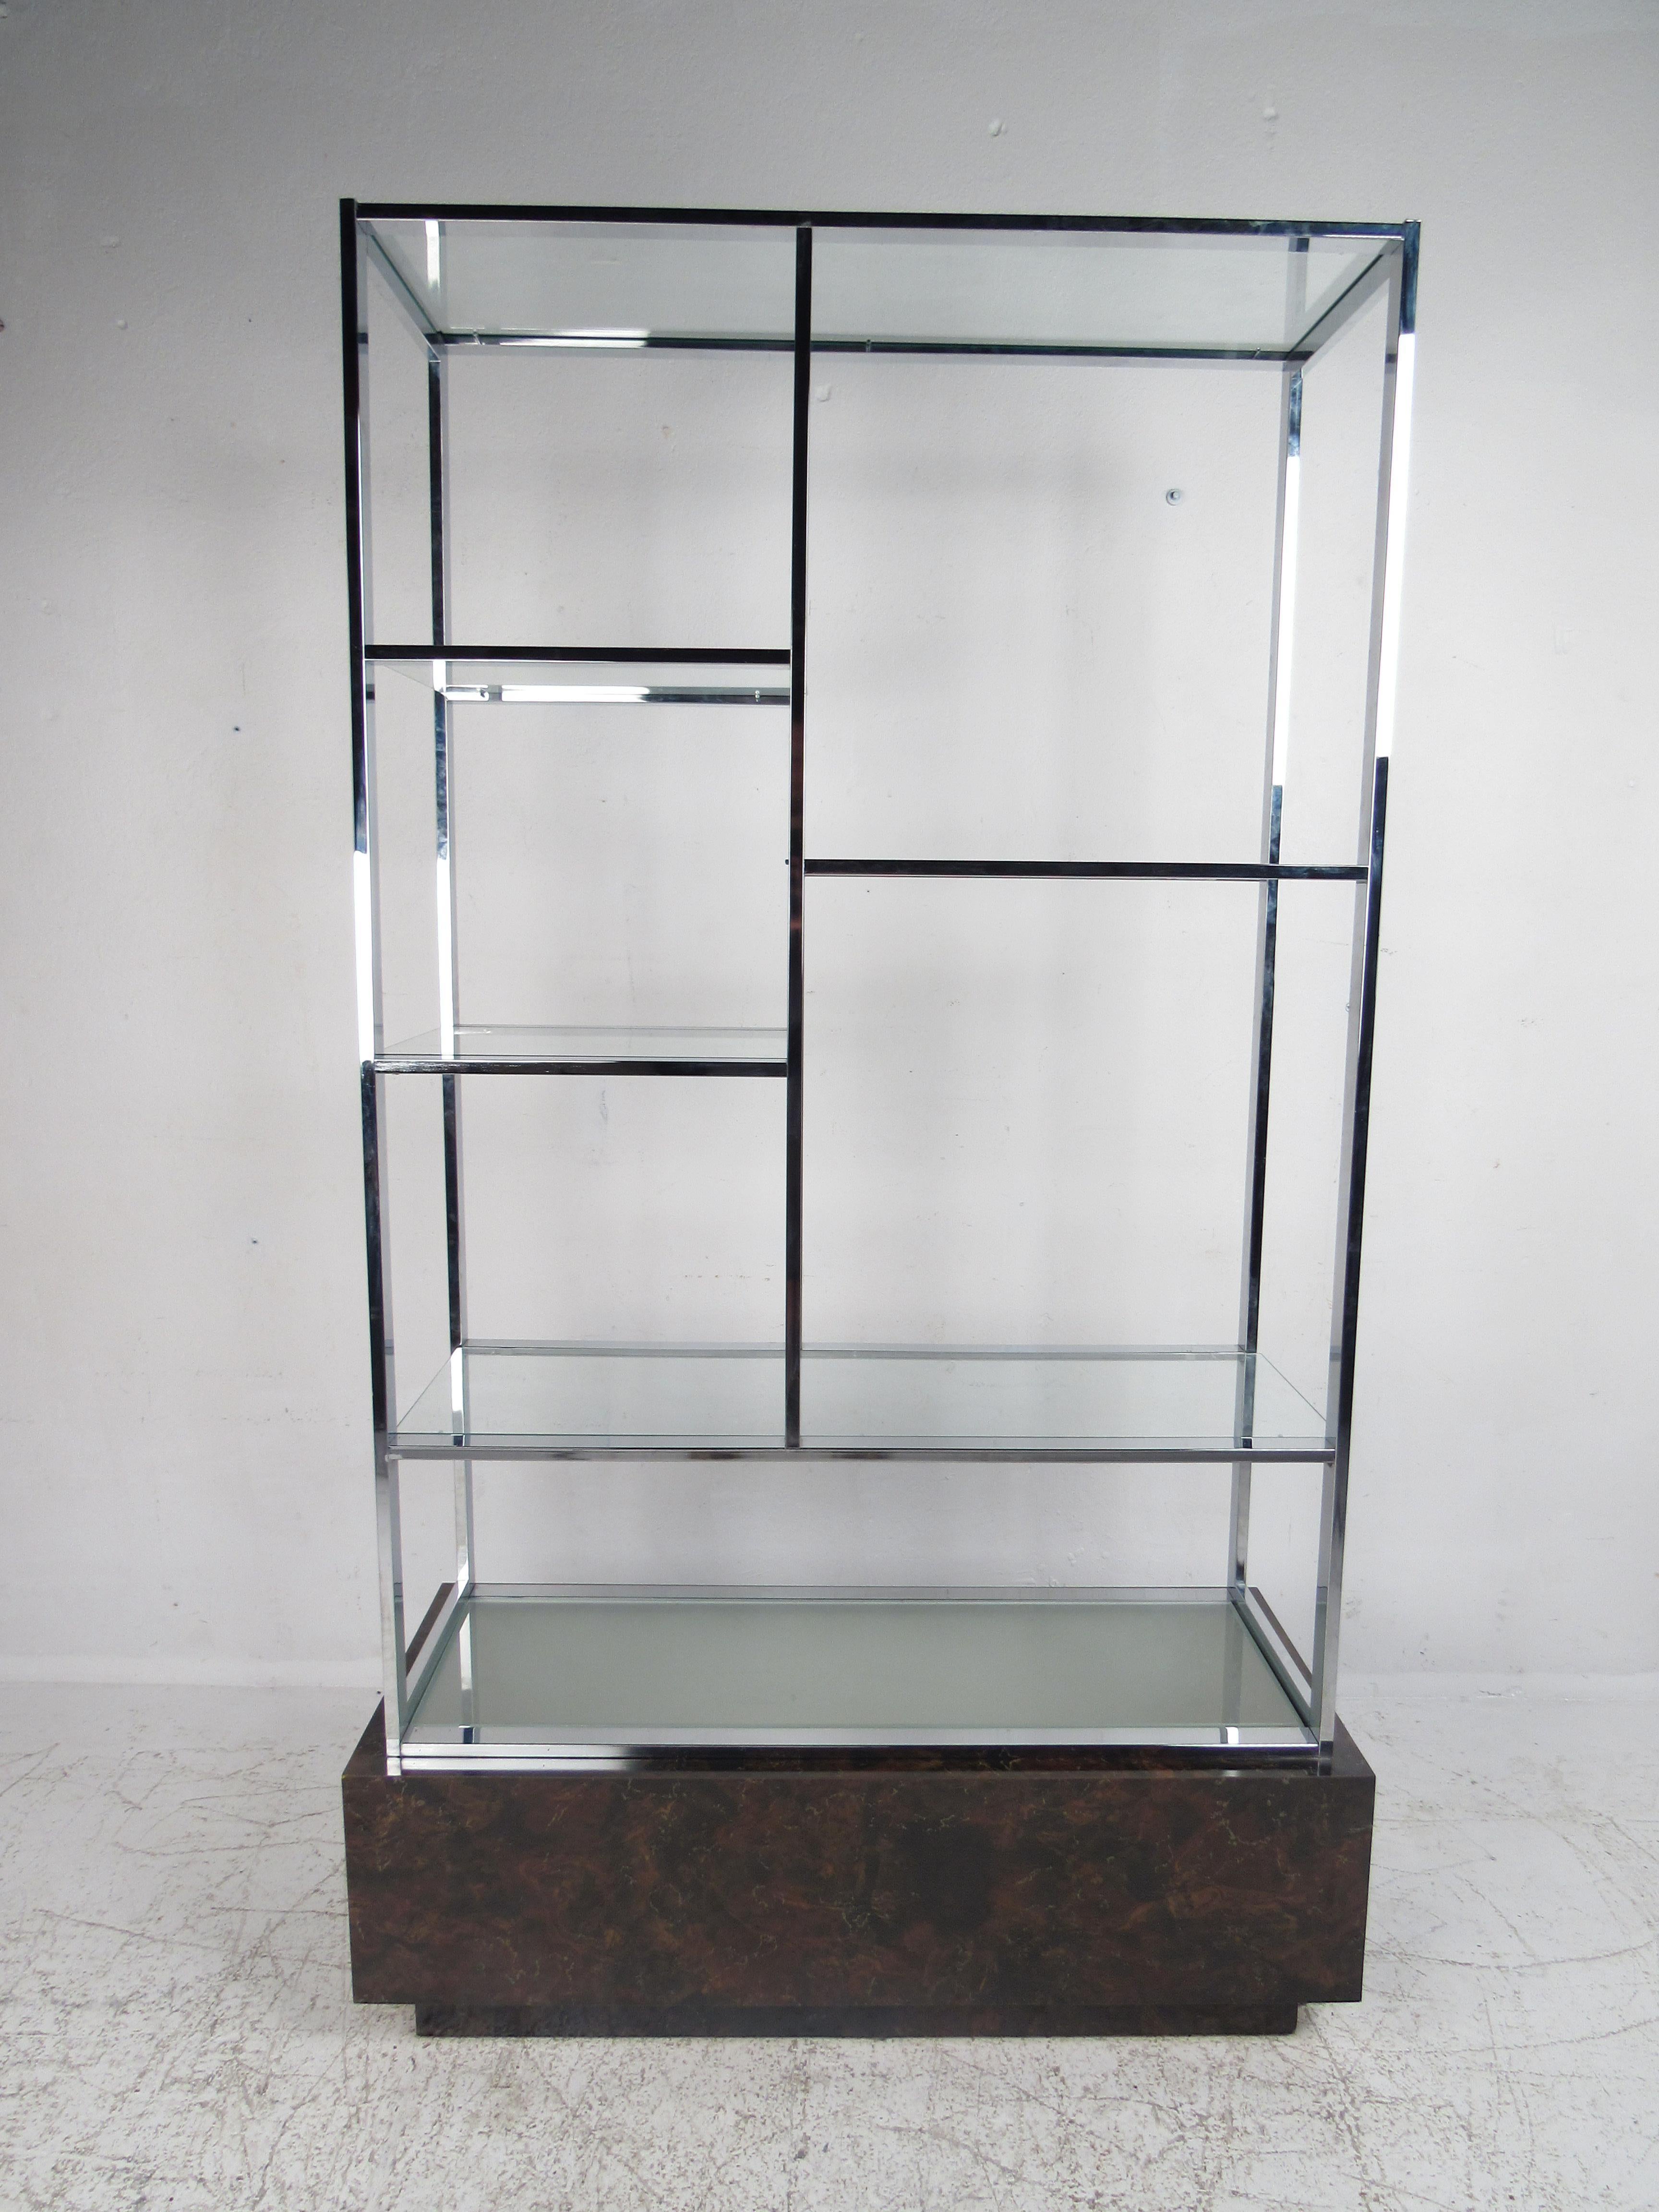 A stunning Mid-Century Modern étagère features a light-up burl base topped with a cloudy glass shelf. This impressive shelving unit has four glass shelves in the middle, perfect for displaying items. The elegant chrome frame with a cubed burl base